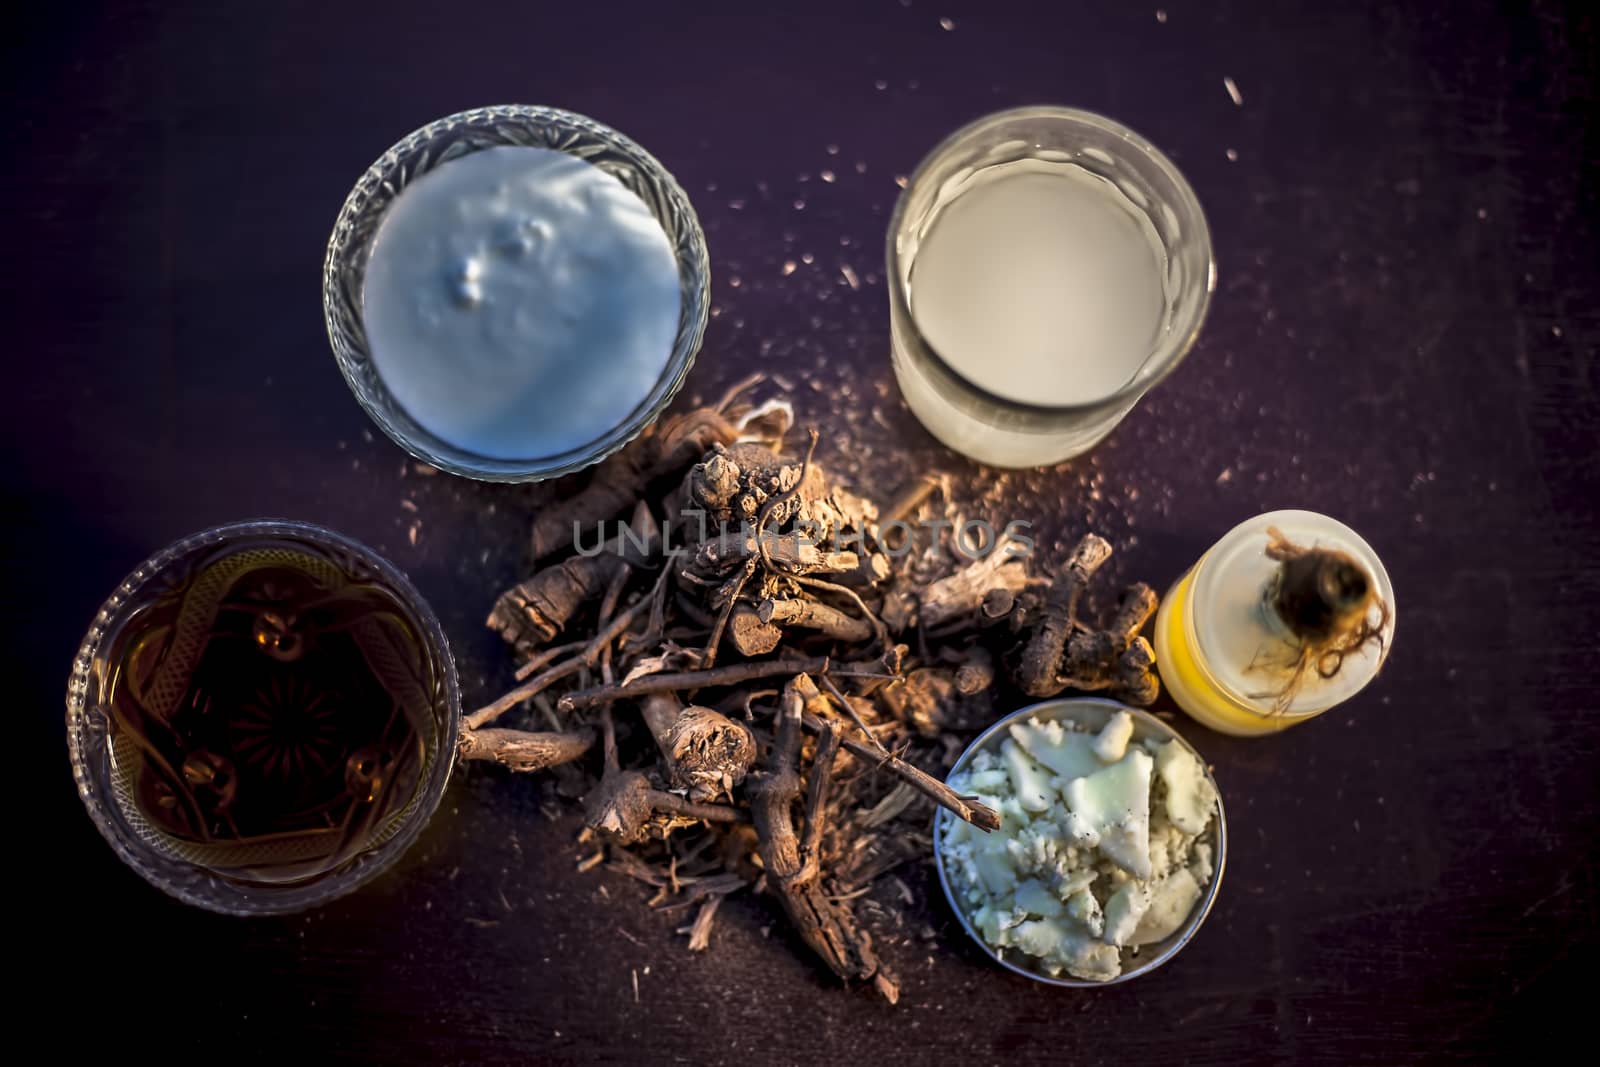 Raw ayurvedic herb chitrak/Plumbago zeylanica roots on the brown-colored shiny surface with some buttermilk, ghee or clarified butter, its extract, curd, and honey with it used in ayurvedic therapy. by mirzamlk